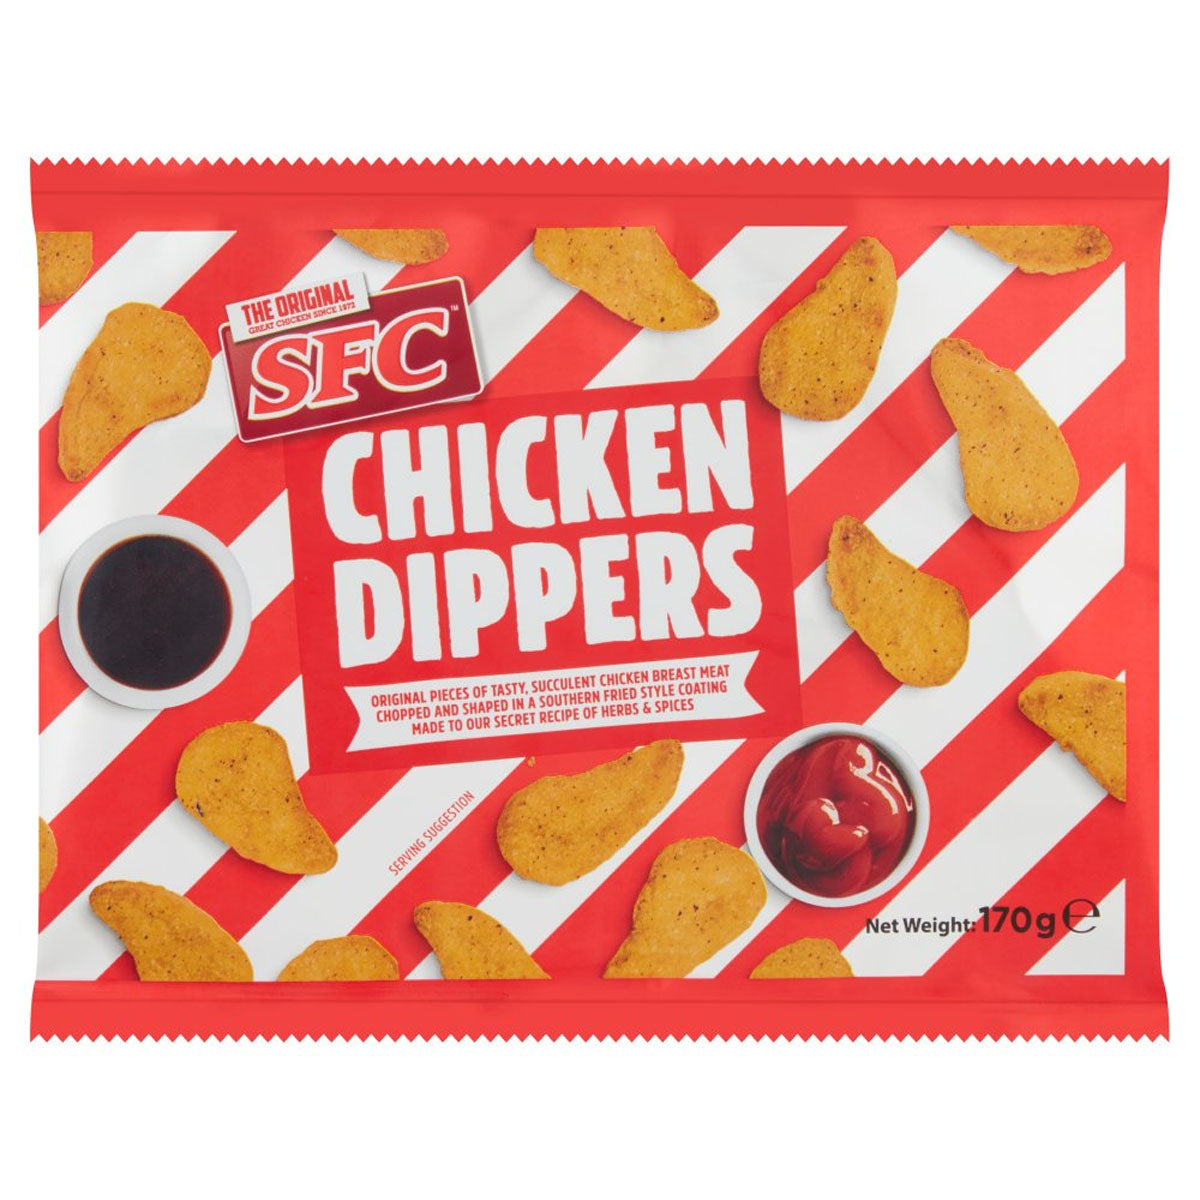 SFC - The Original Chicken Dippers - 170g on a white background.